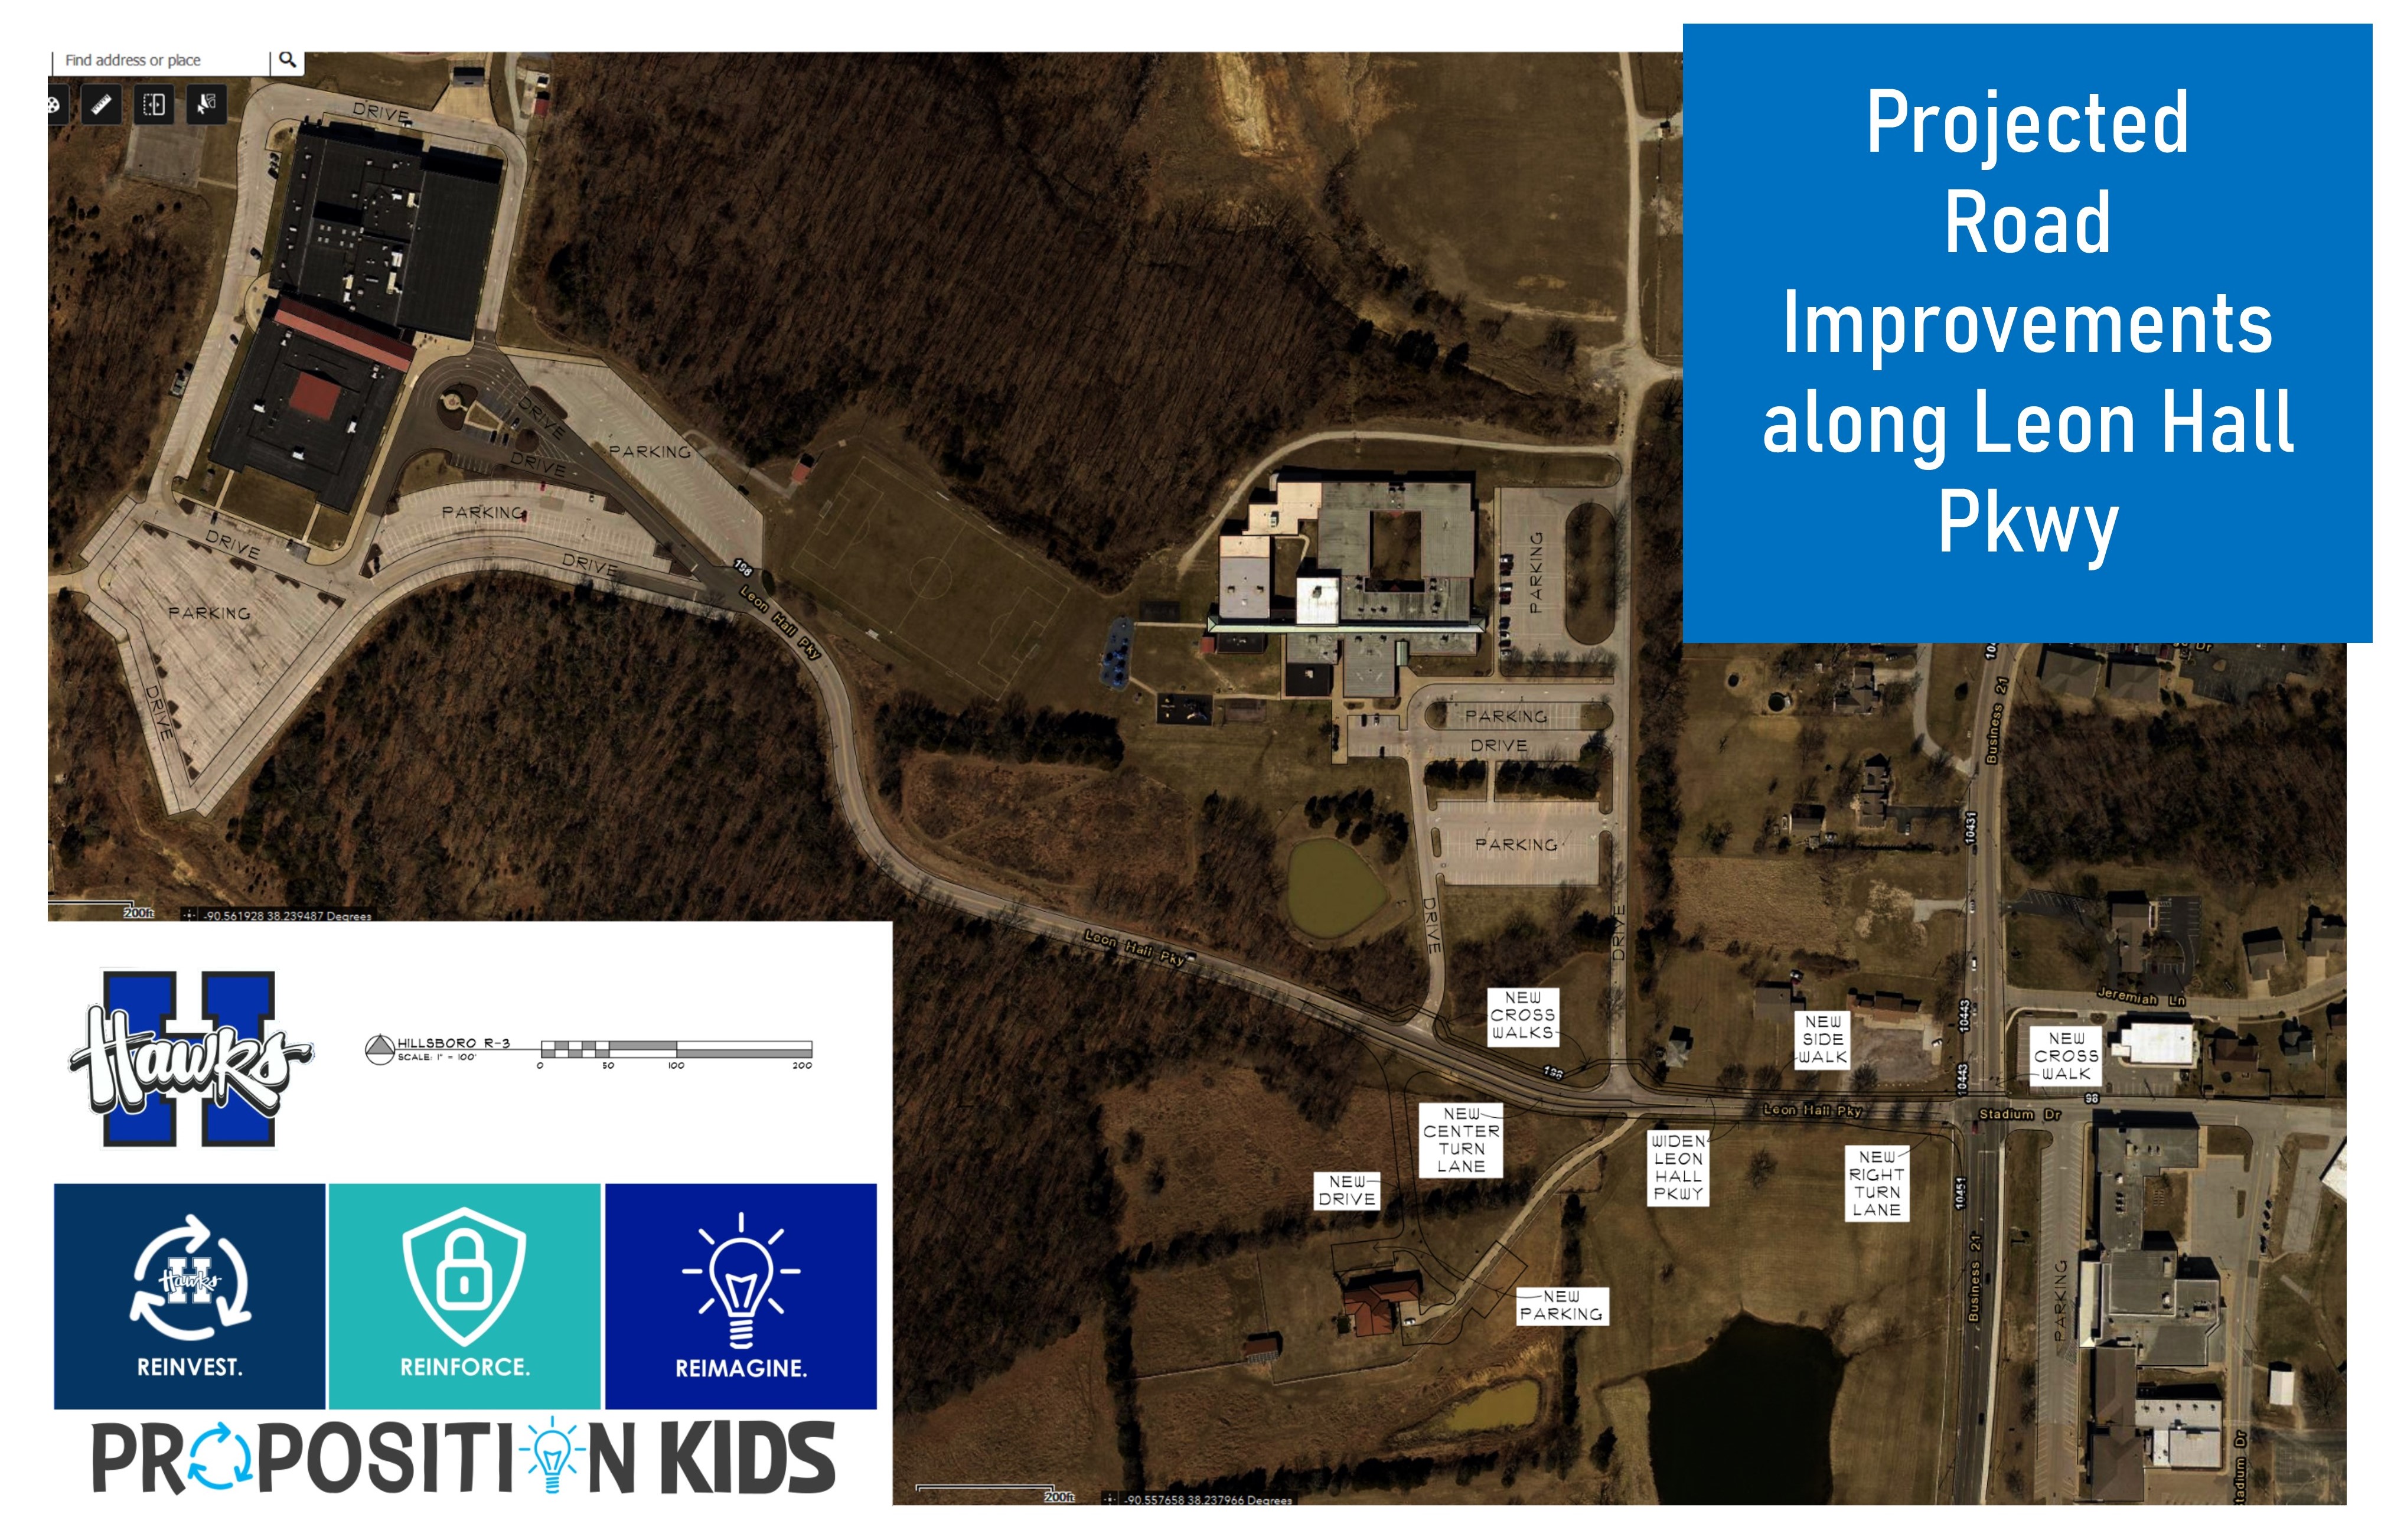 Projected Road Improvements on Leon Hall Parkway